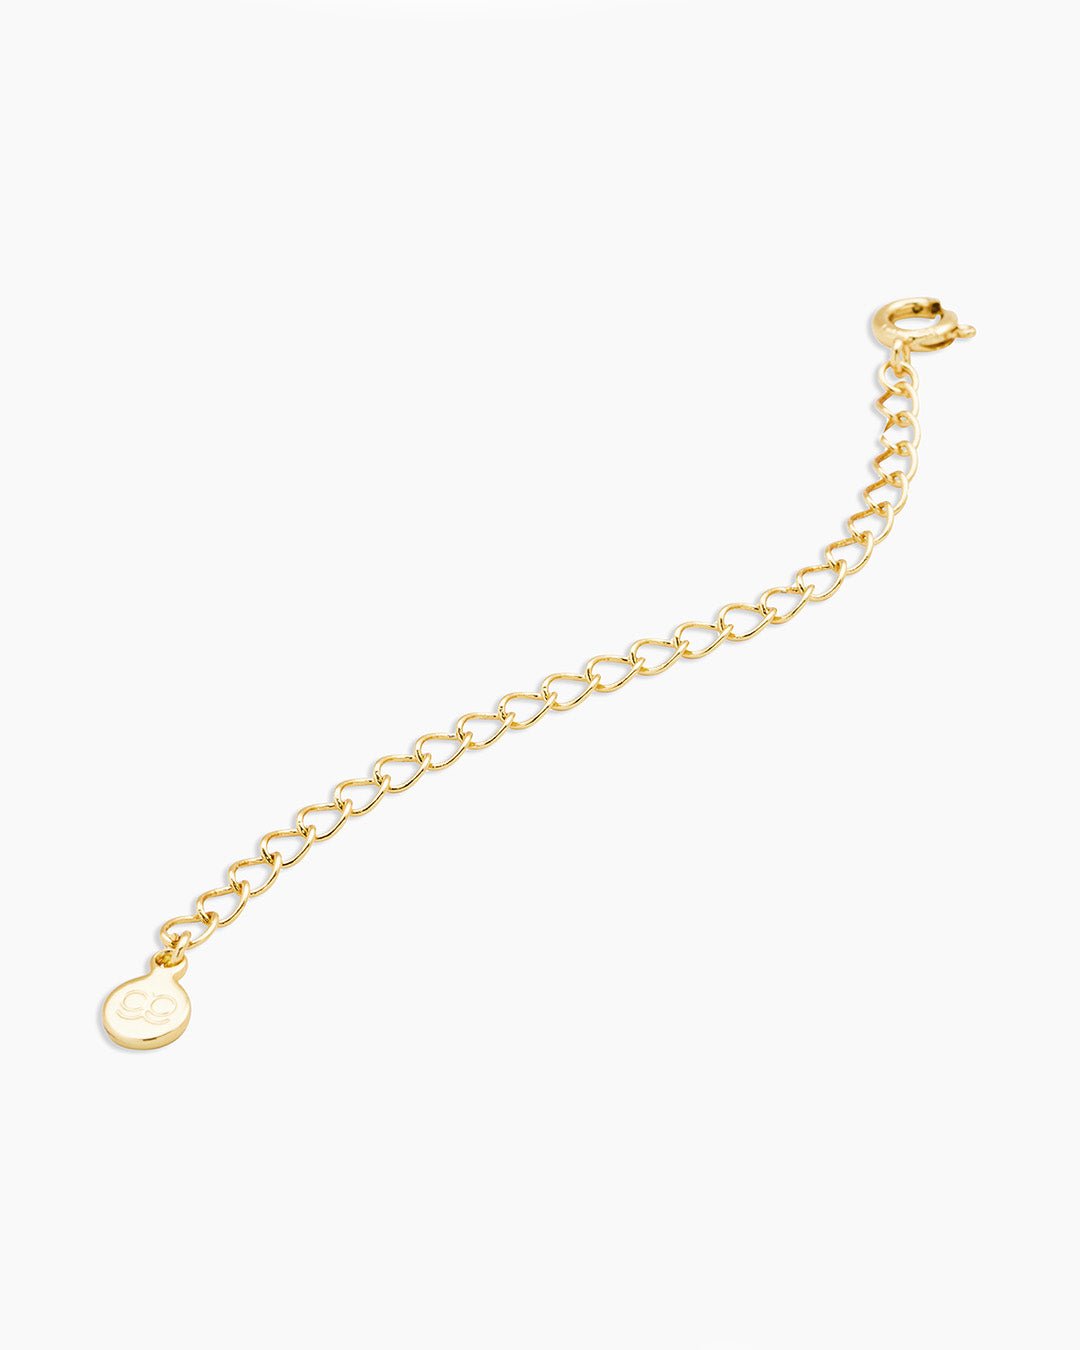 Body Chain or Necklace Extender, Jewelry Extension Gold – AMYO Bridal